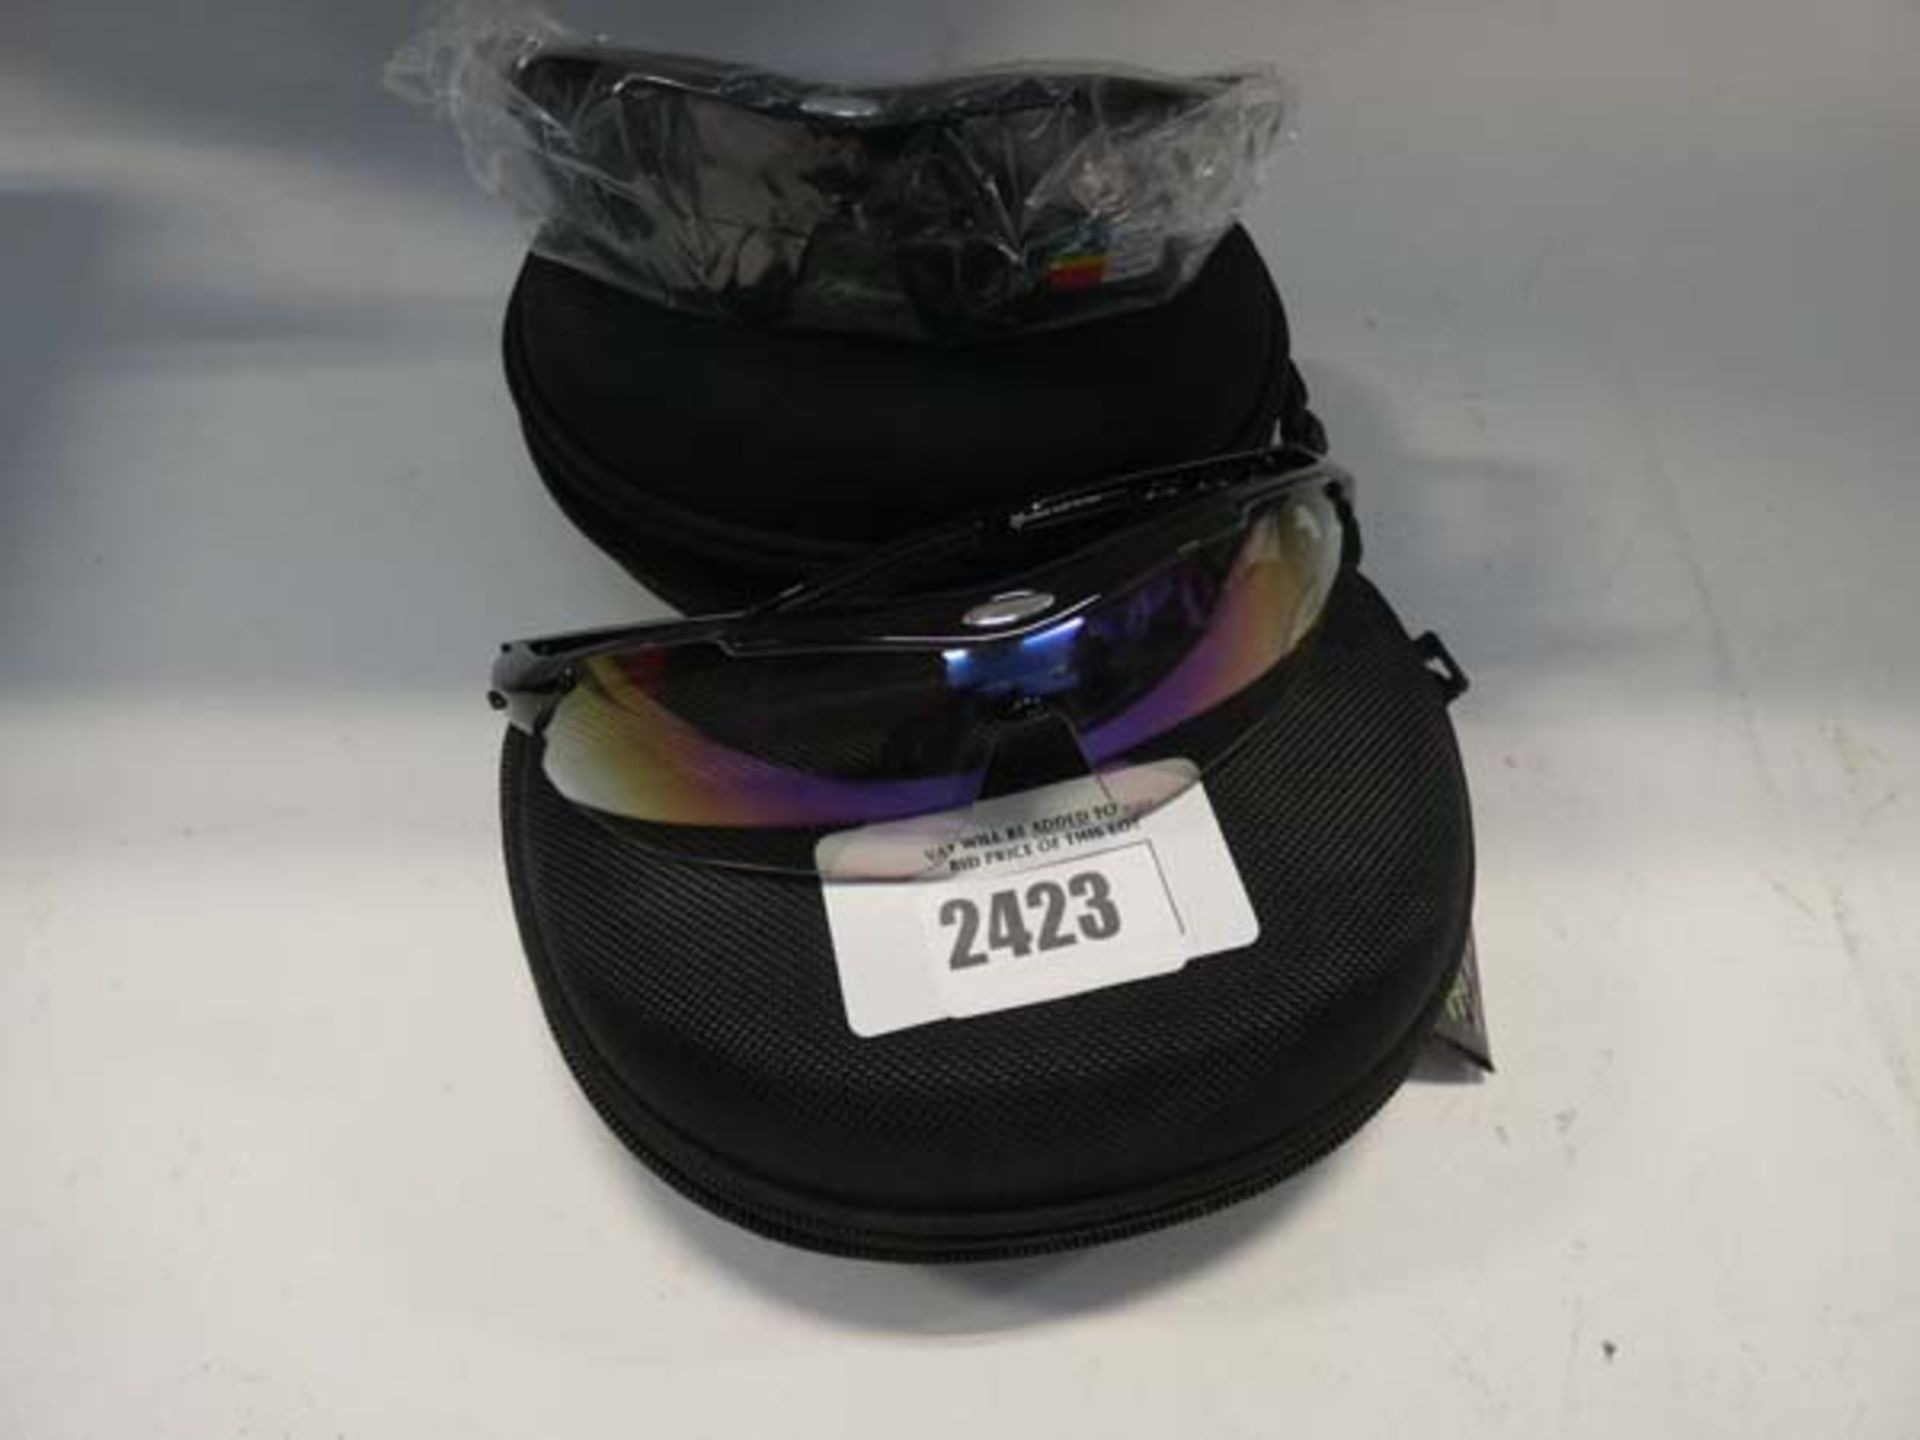 2 Pairs of Rock Bros protective eye wear with accessories and cases.